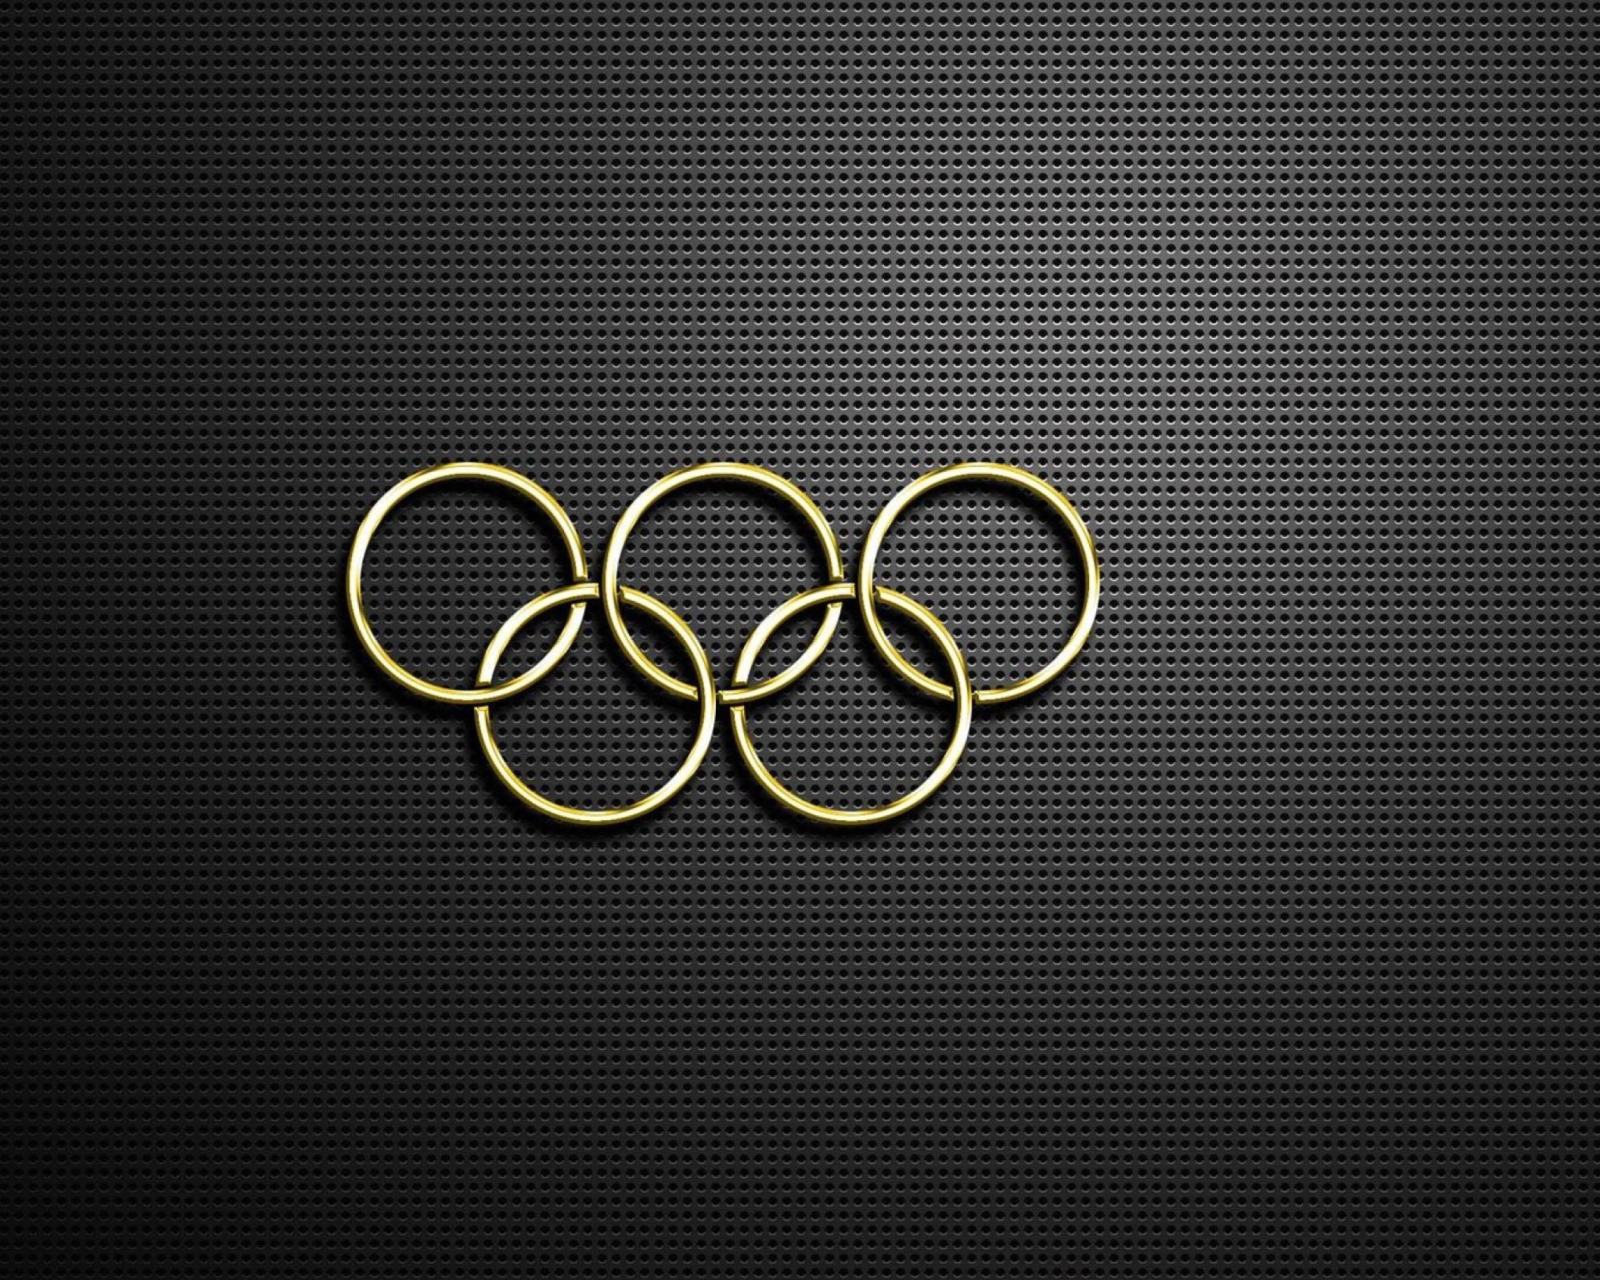 Olympic Games wallpaper 1600x1280